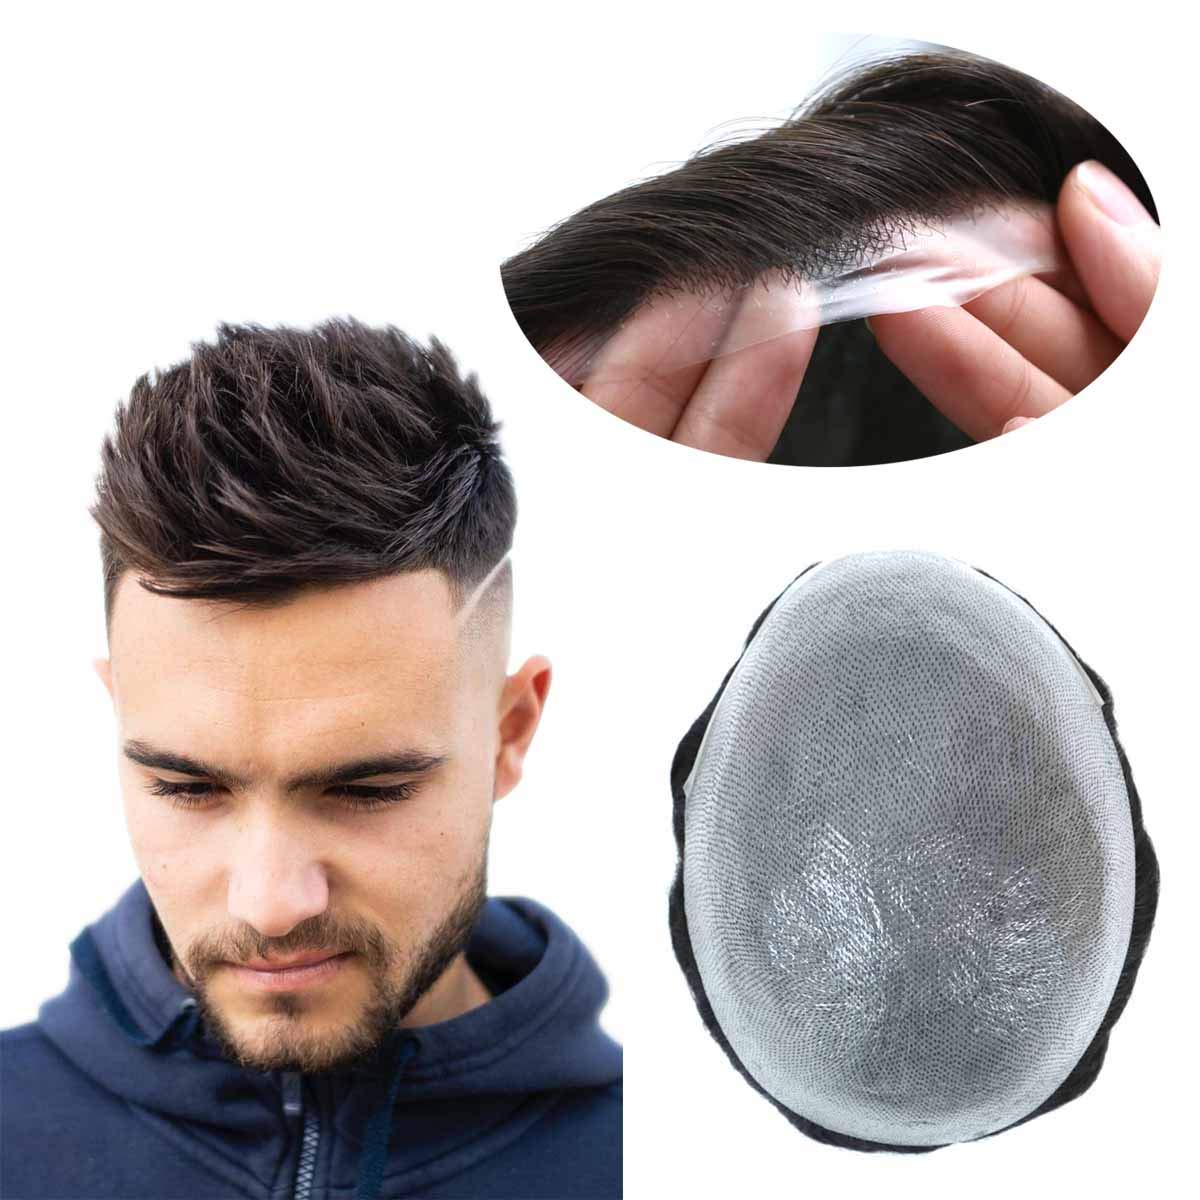 Mens hairpieces that look natural